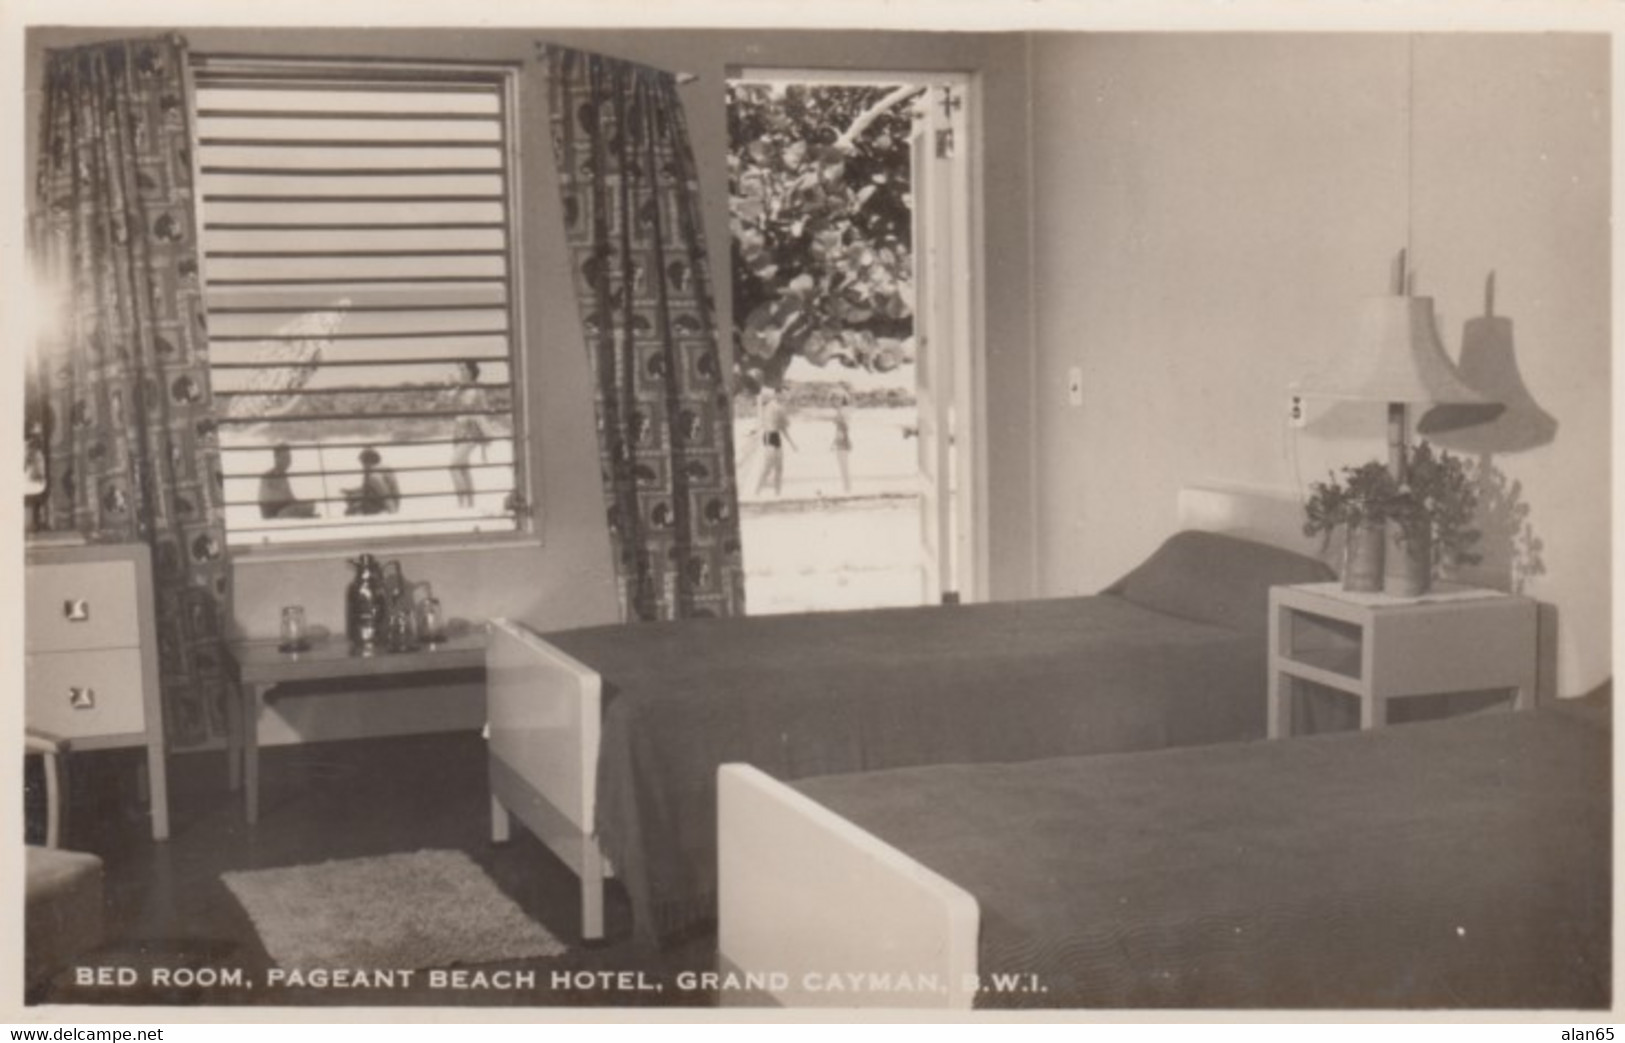 Grand Cayman BWI, Pageant Beach Hotel Bedroom Interior View, C1940s/50s Vintage Real Photo Postcard - Caimán (Islas)